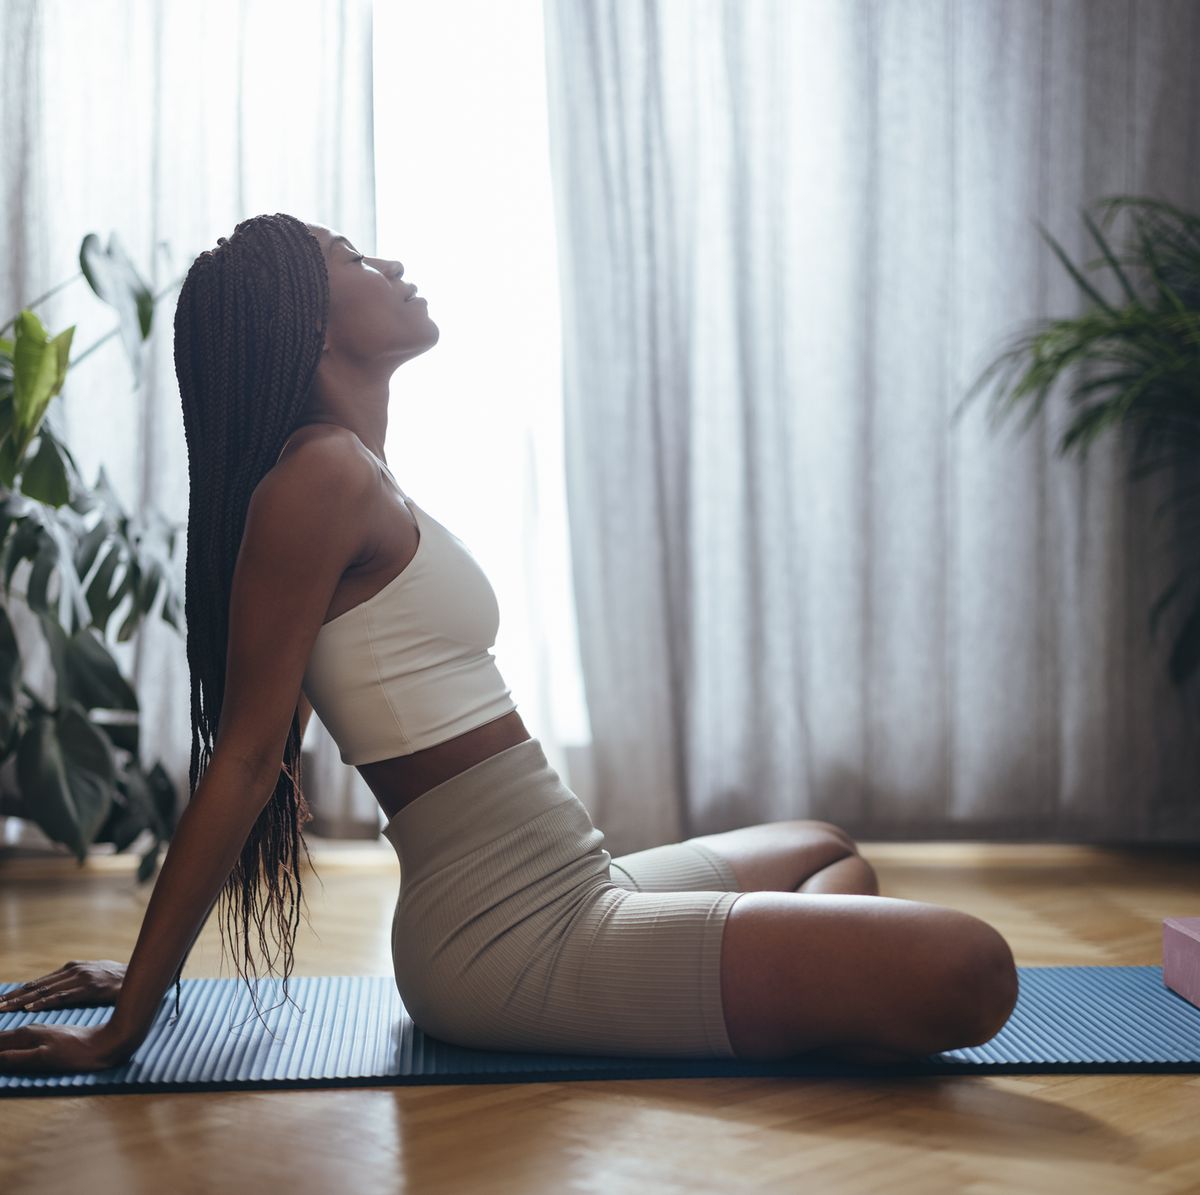 Yoga vs Pilates - the key differences and benefits explained